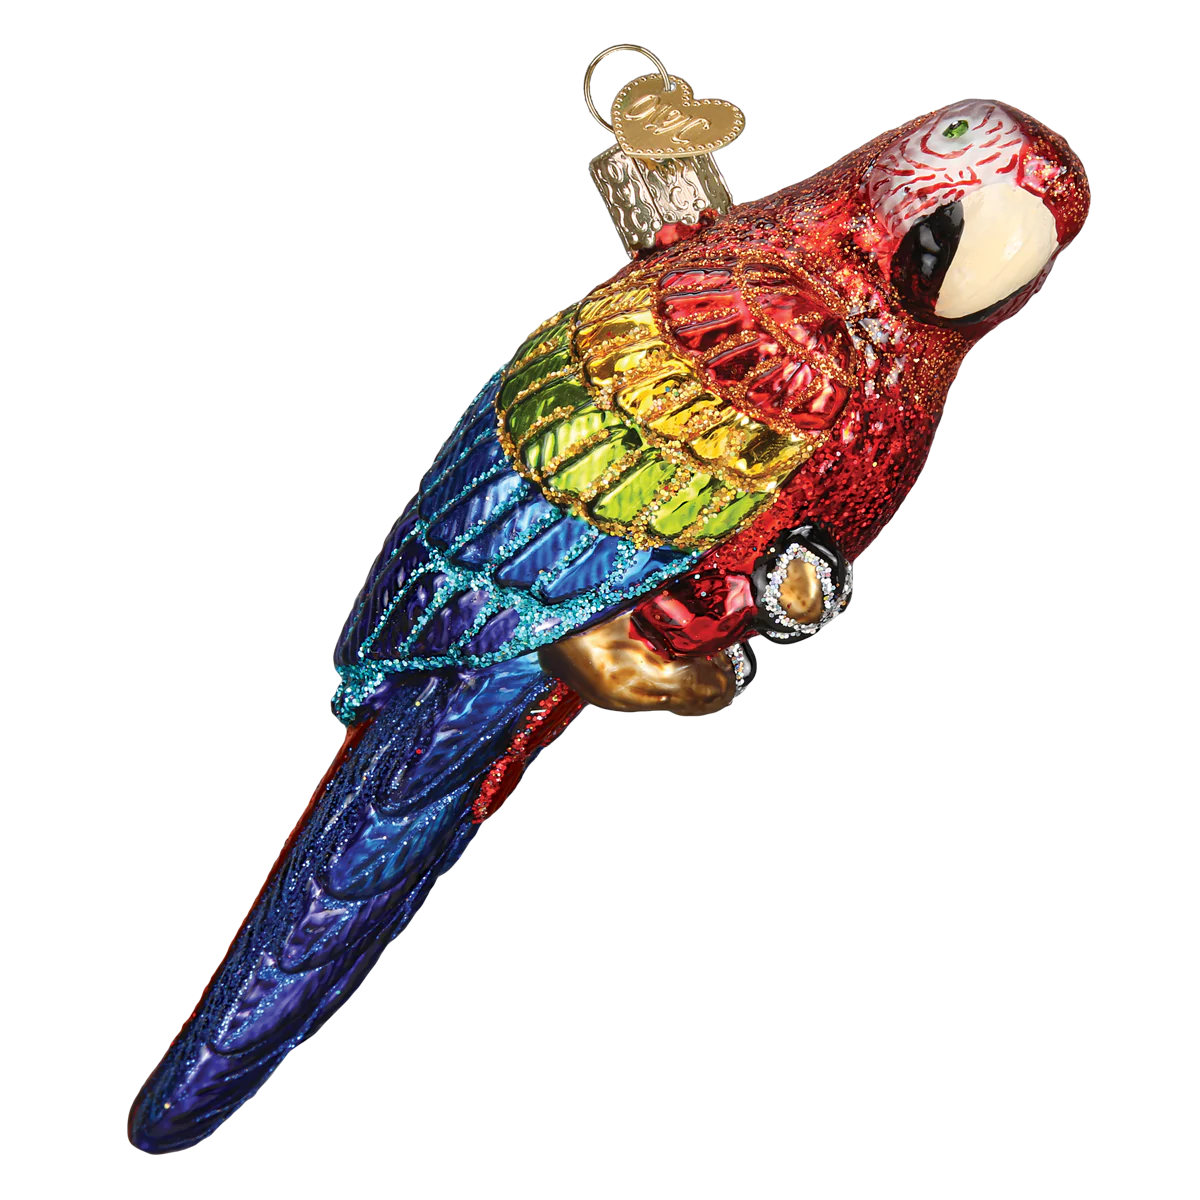 Tropical Parrot Ornament  Old World Christmas   